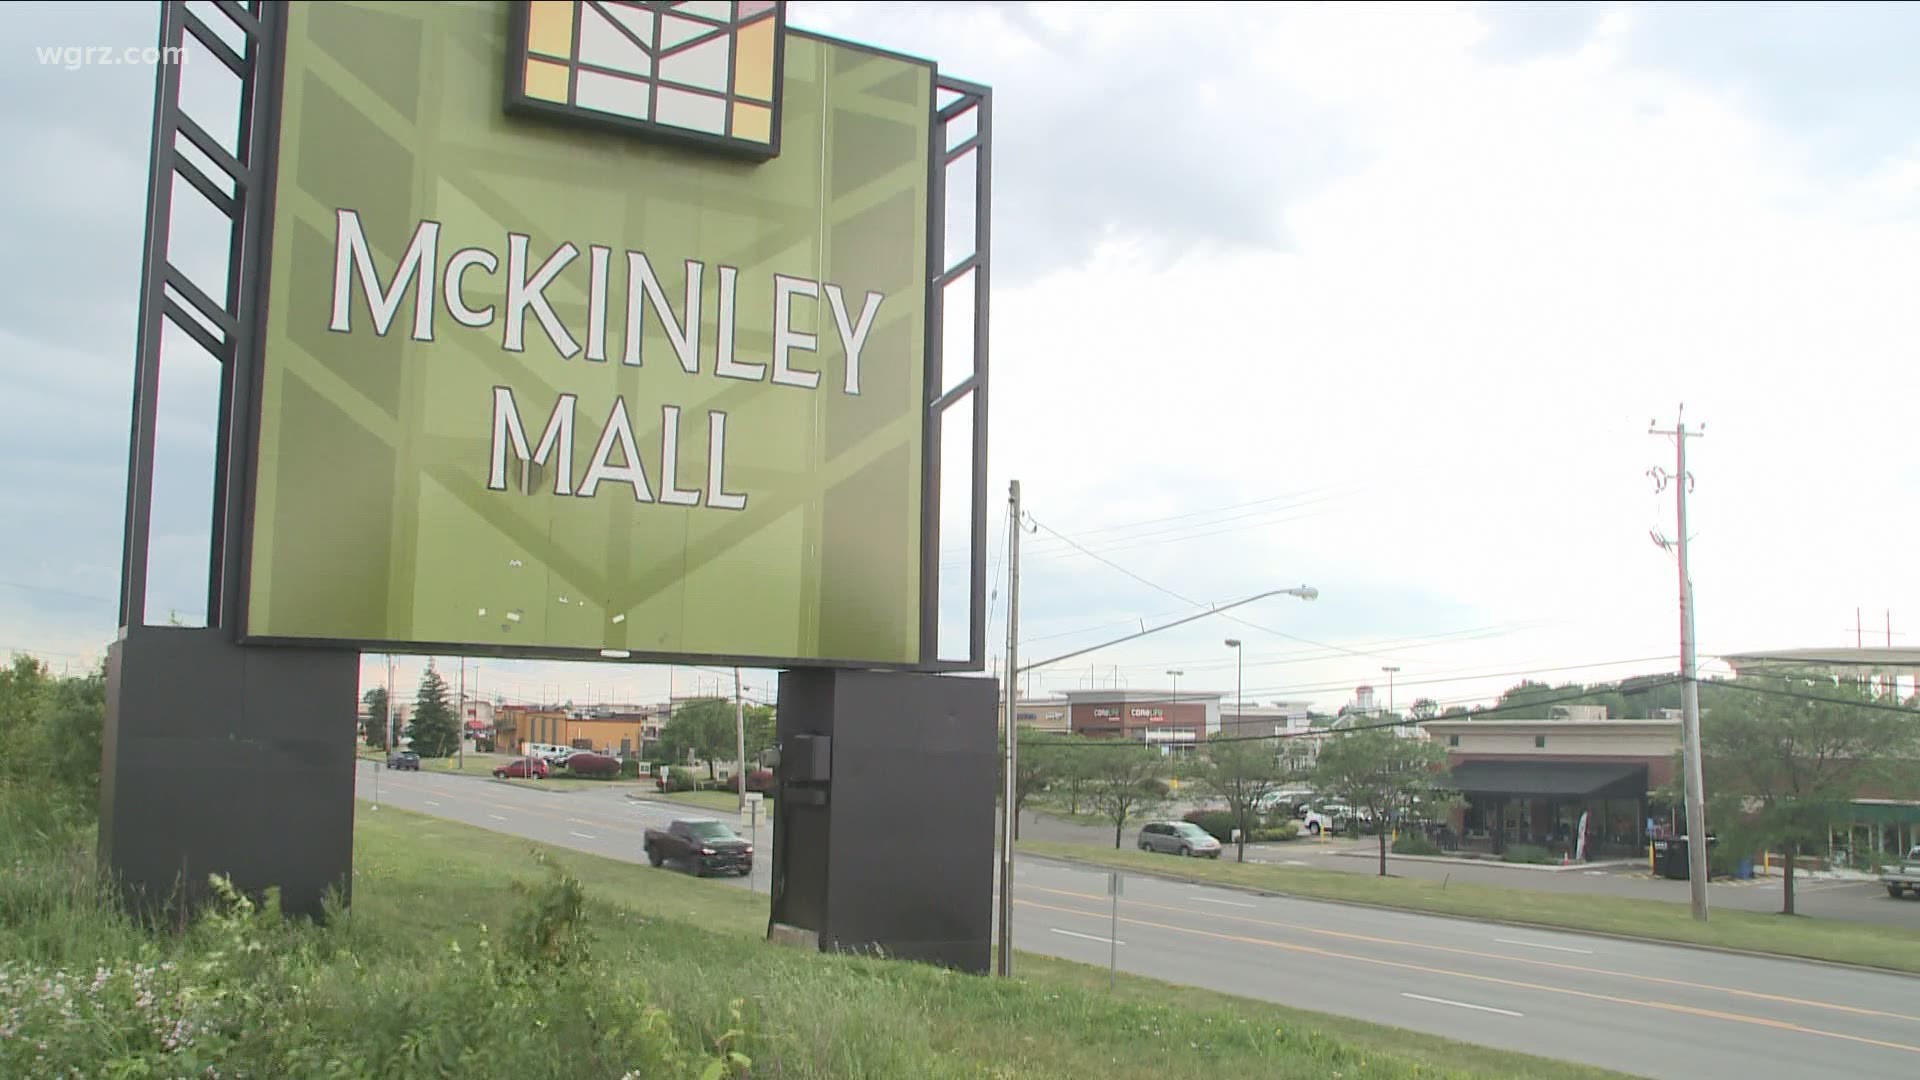 A new potential buyer is on the horizon according to our partners at Buffalo Business First. Channel 2 tells you that the future of the mall is still not clear.